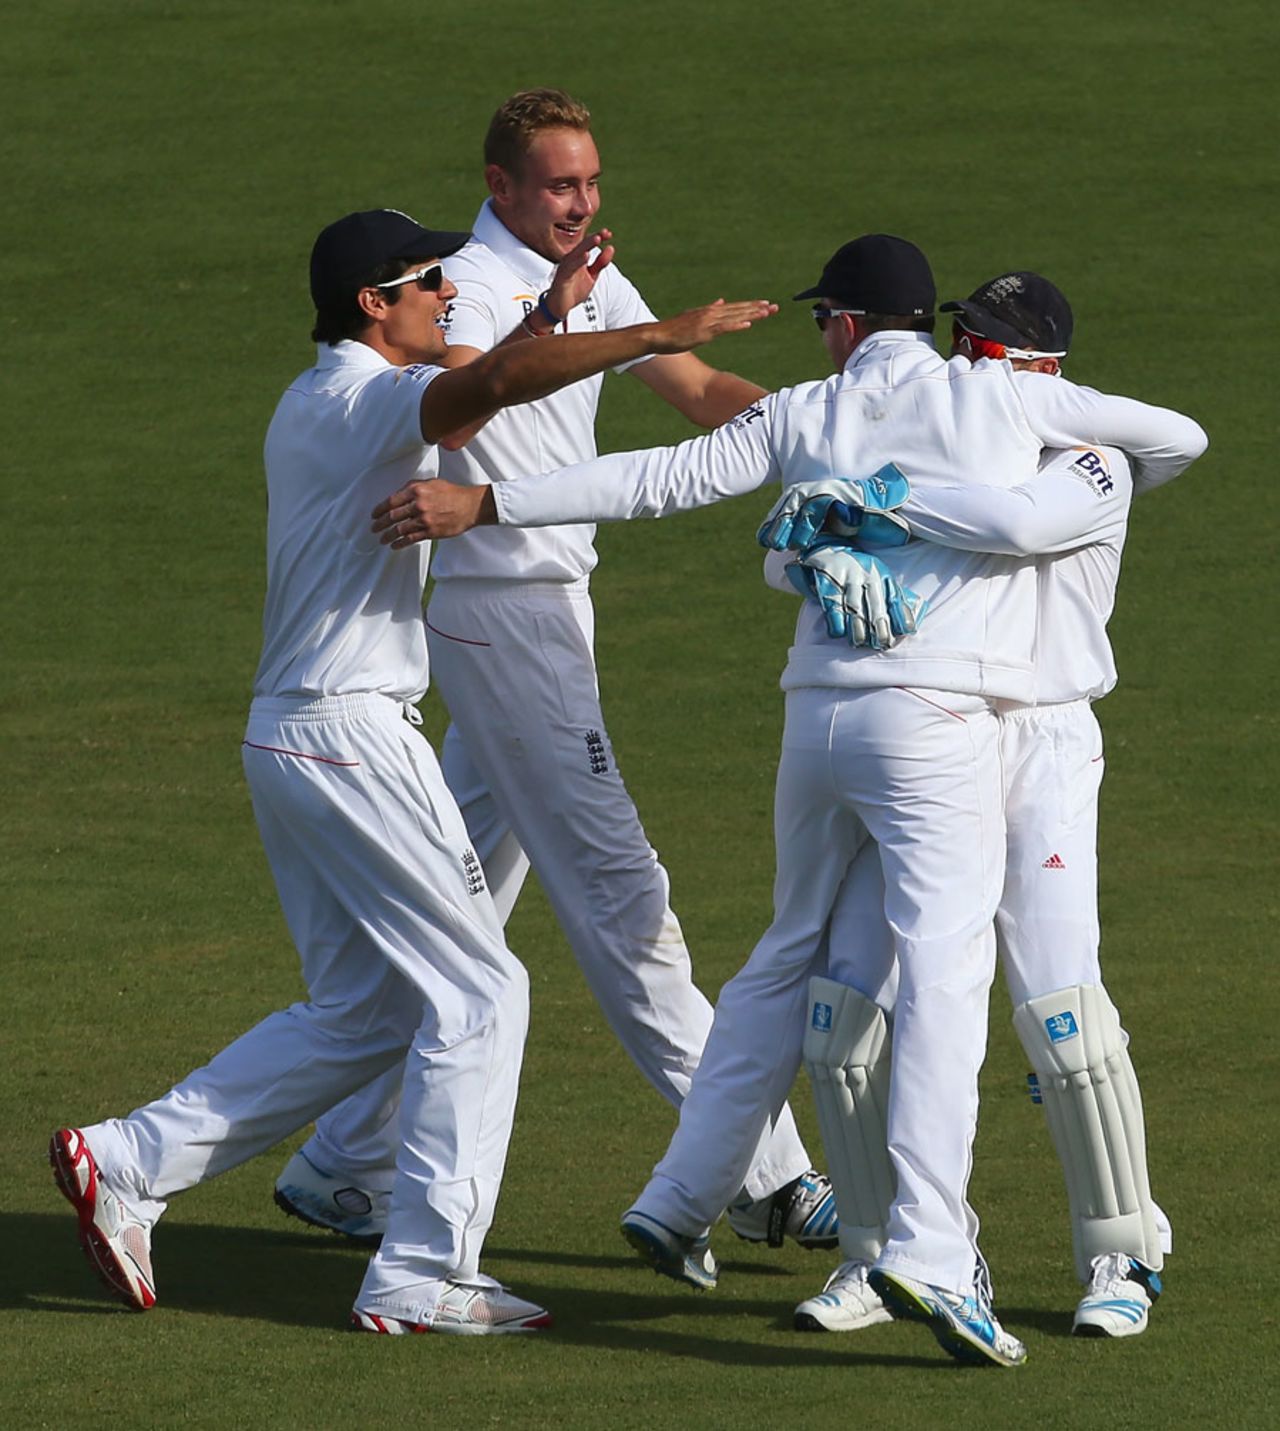 Graeme Swann is congratulated on his spectacular catch, Australia v England, 2nd Test, Adelaide, 1st day, December, 5, 2013